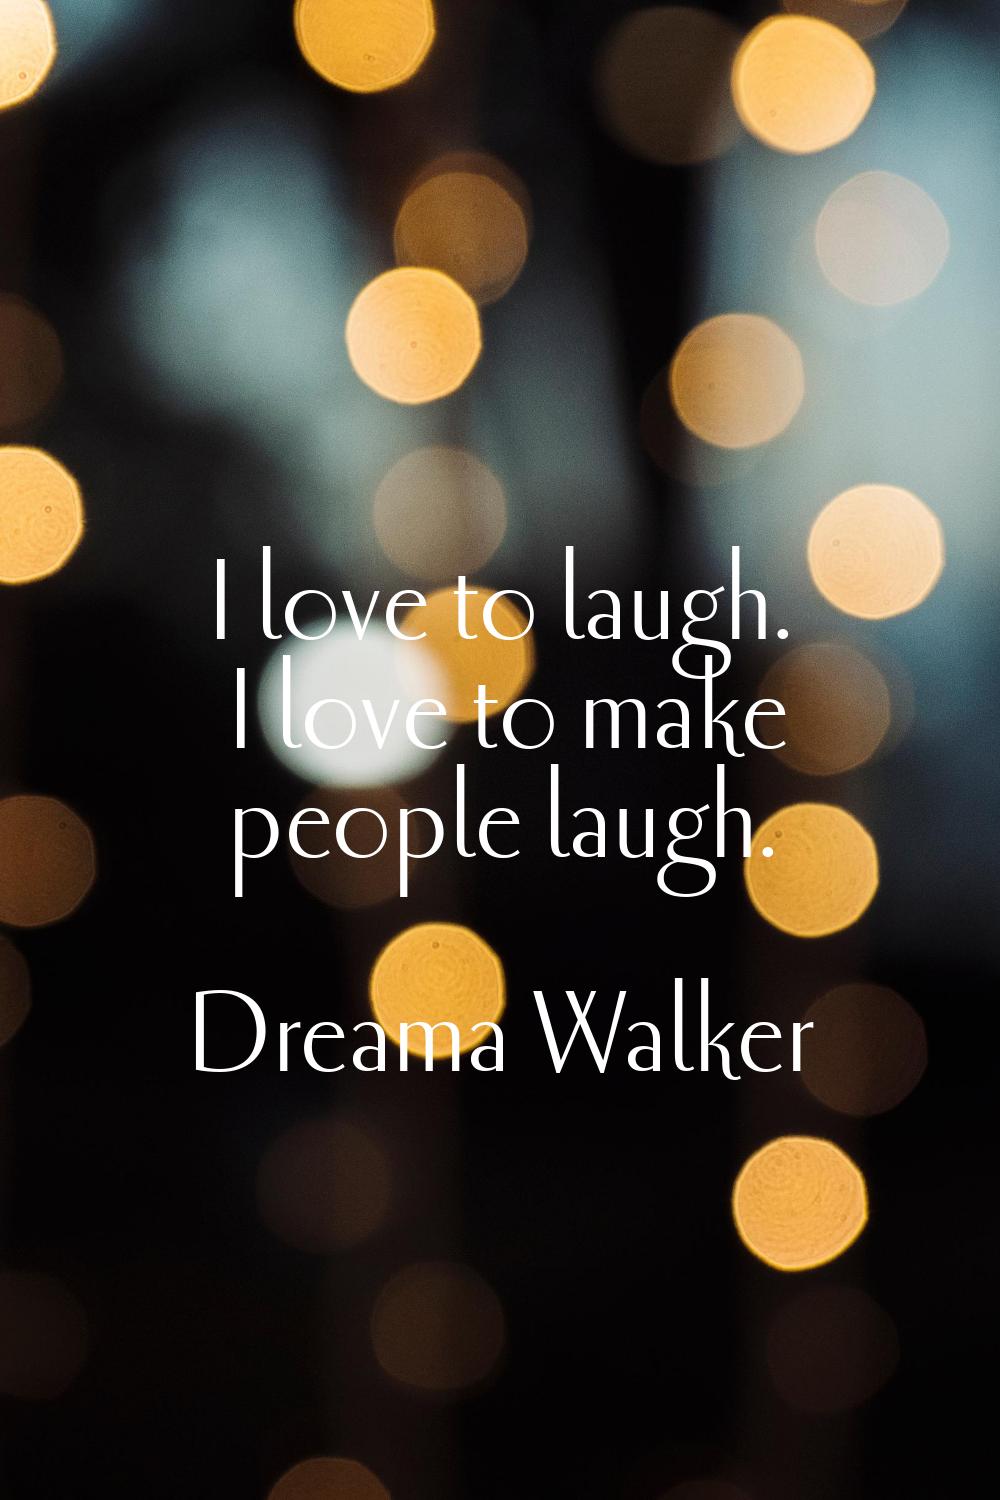 I love to laugh. I love to make people laugh.